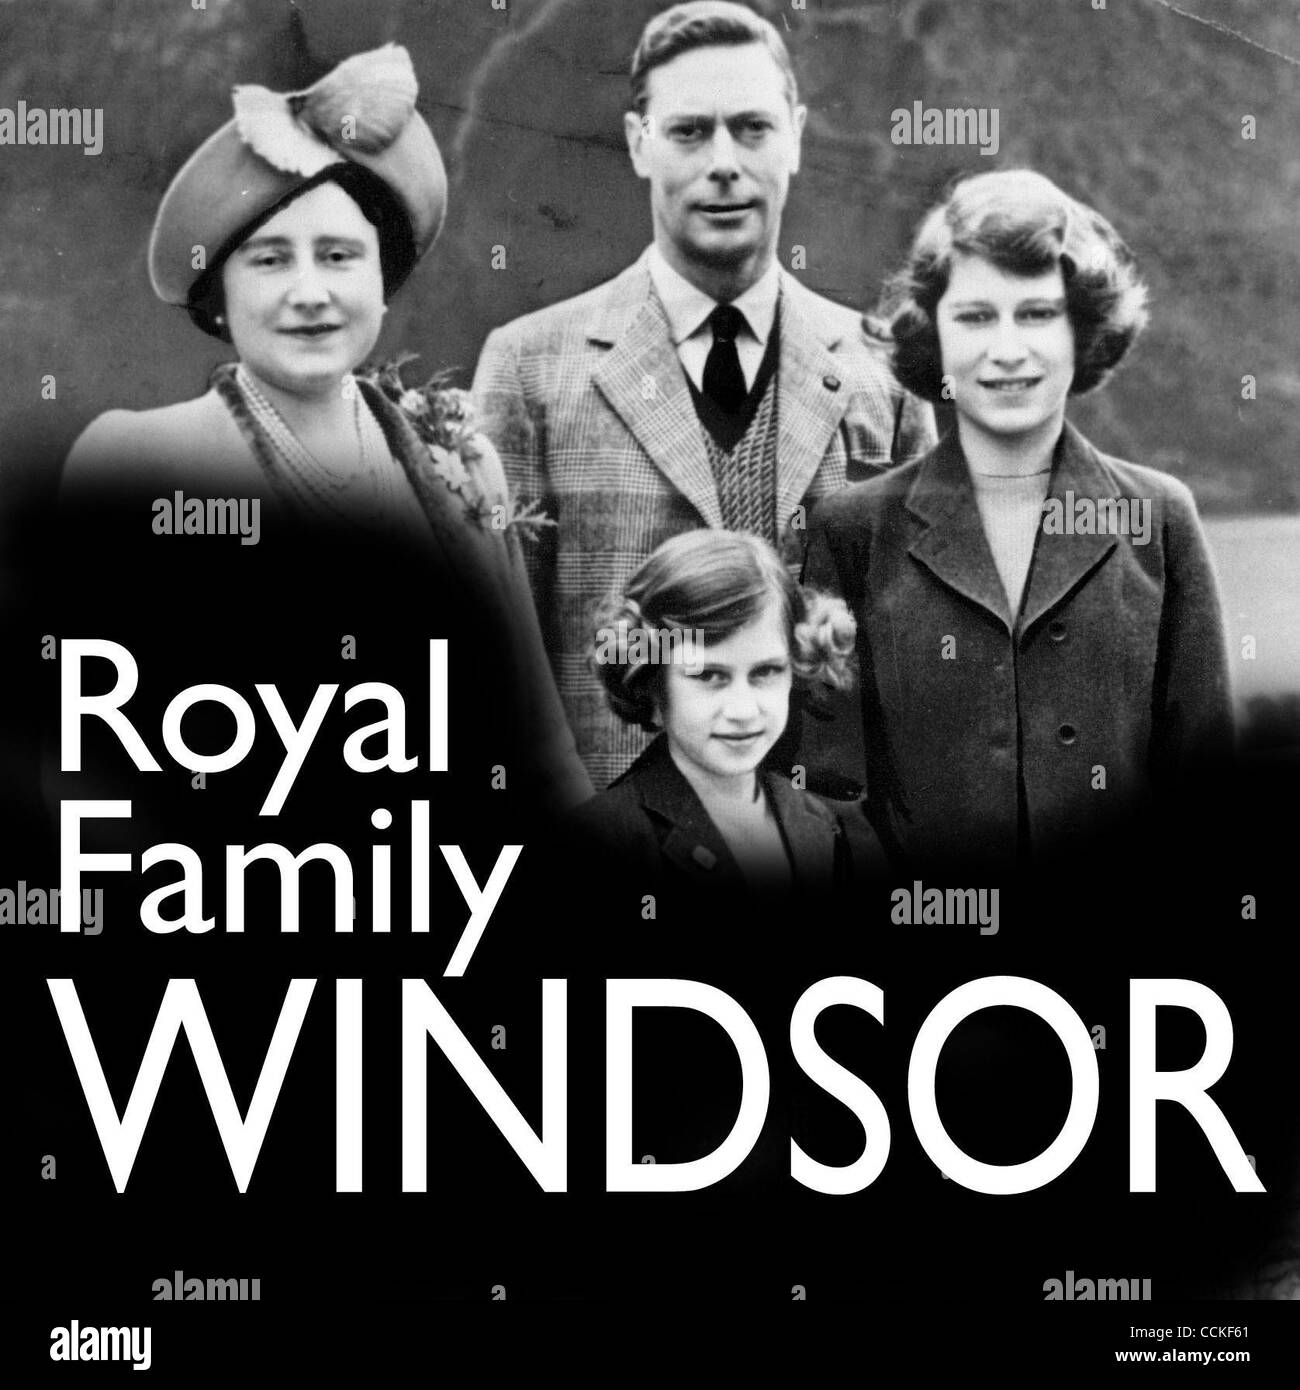 Apr 26, 1948 - London, UK - GEORGE VI Became King unexpectedly following the abdication of his brother, King Edward VIII, in 1936. A conscientious and dedicated man, he worked hard to adapt to the role into which he was suddenly thrown. He had married Lady ELIZABETH BOWES-LYON in 1923. King George V Stock Photo